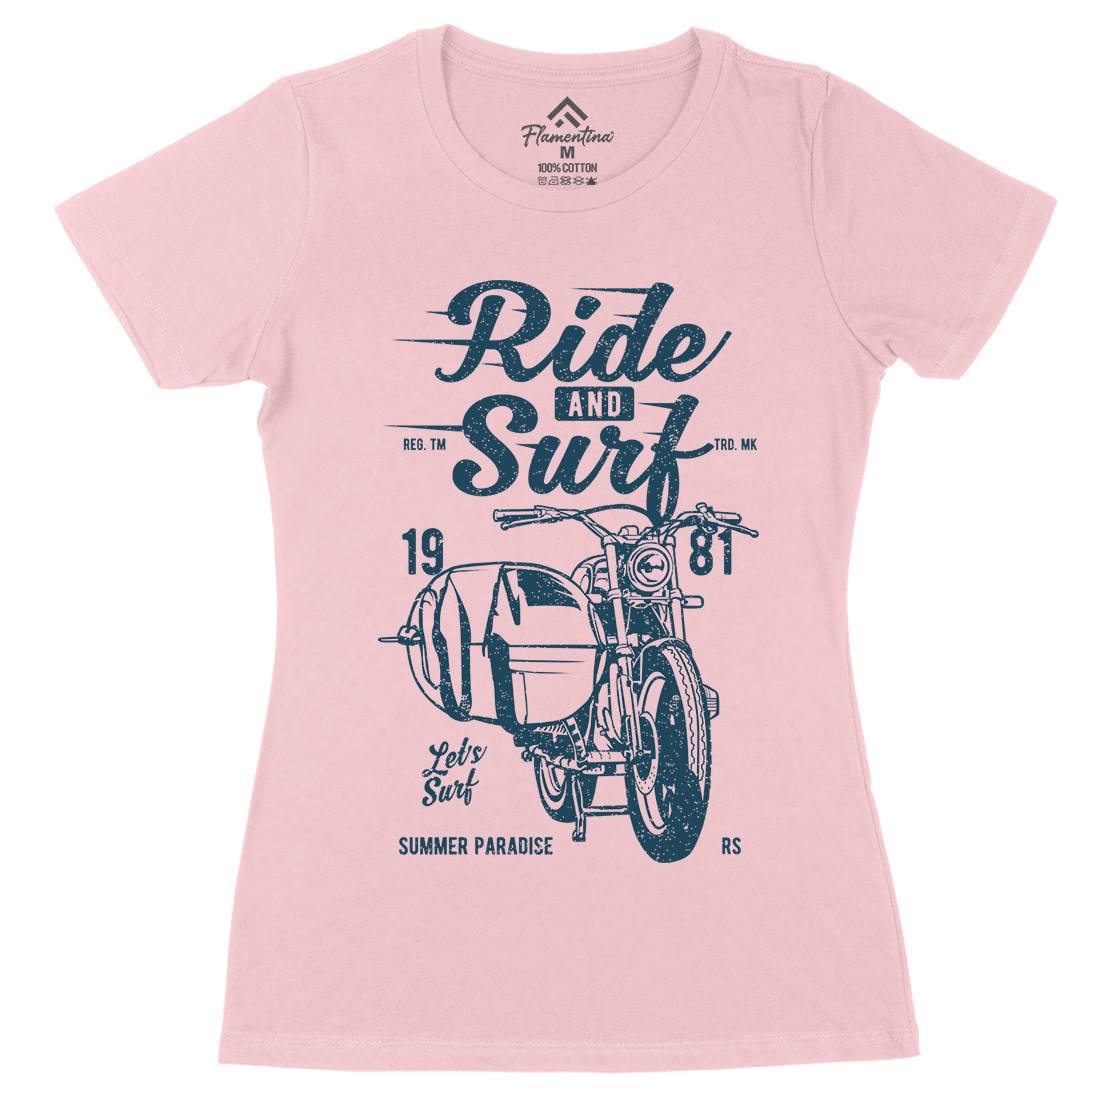 Ride And Womens Organic Crew Neck T-Shirt Surf A742